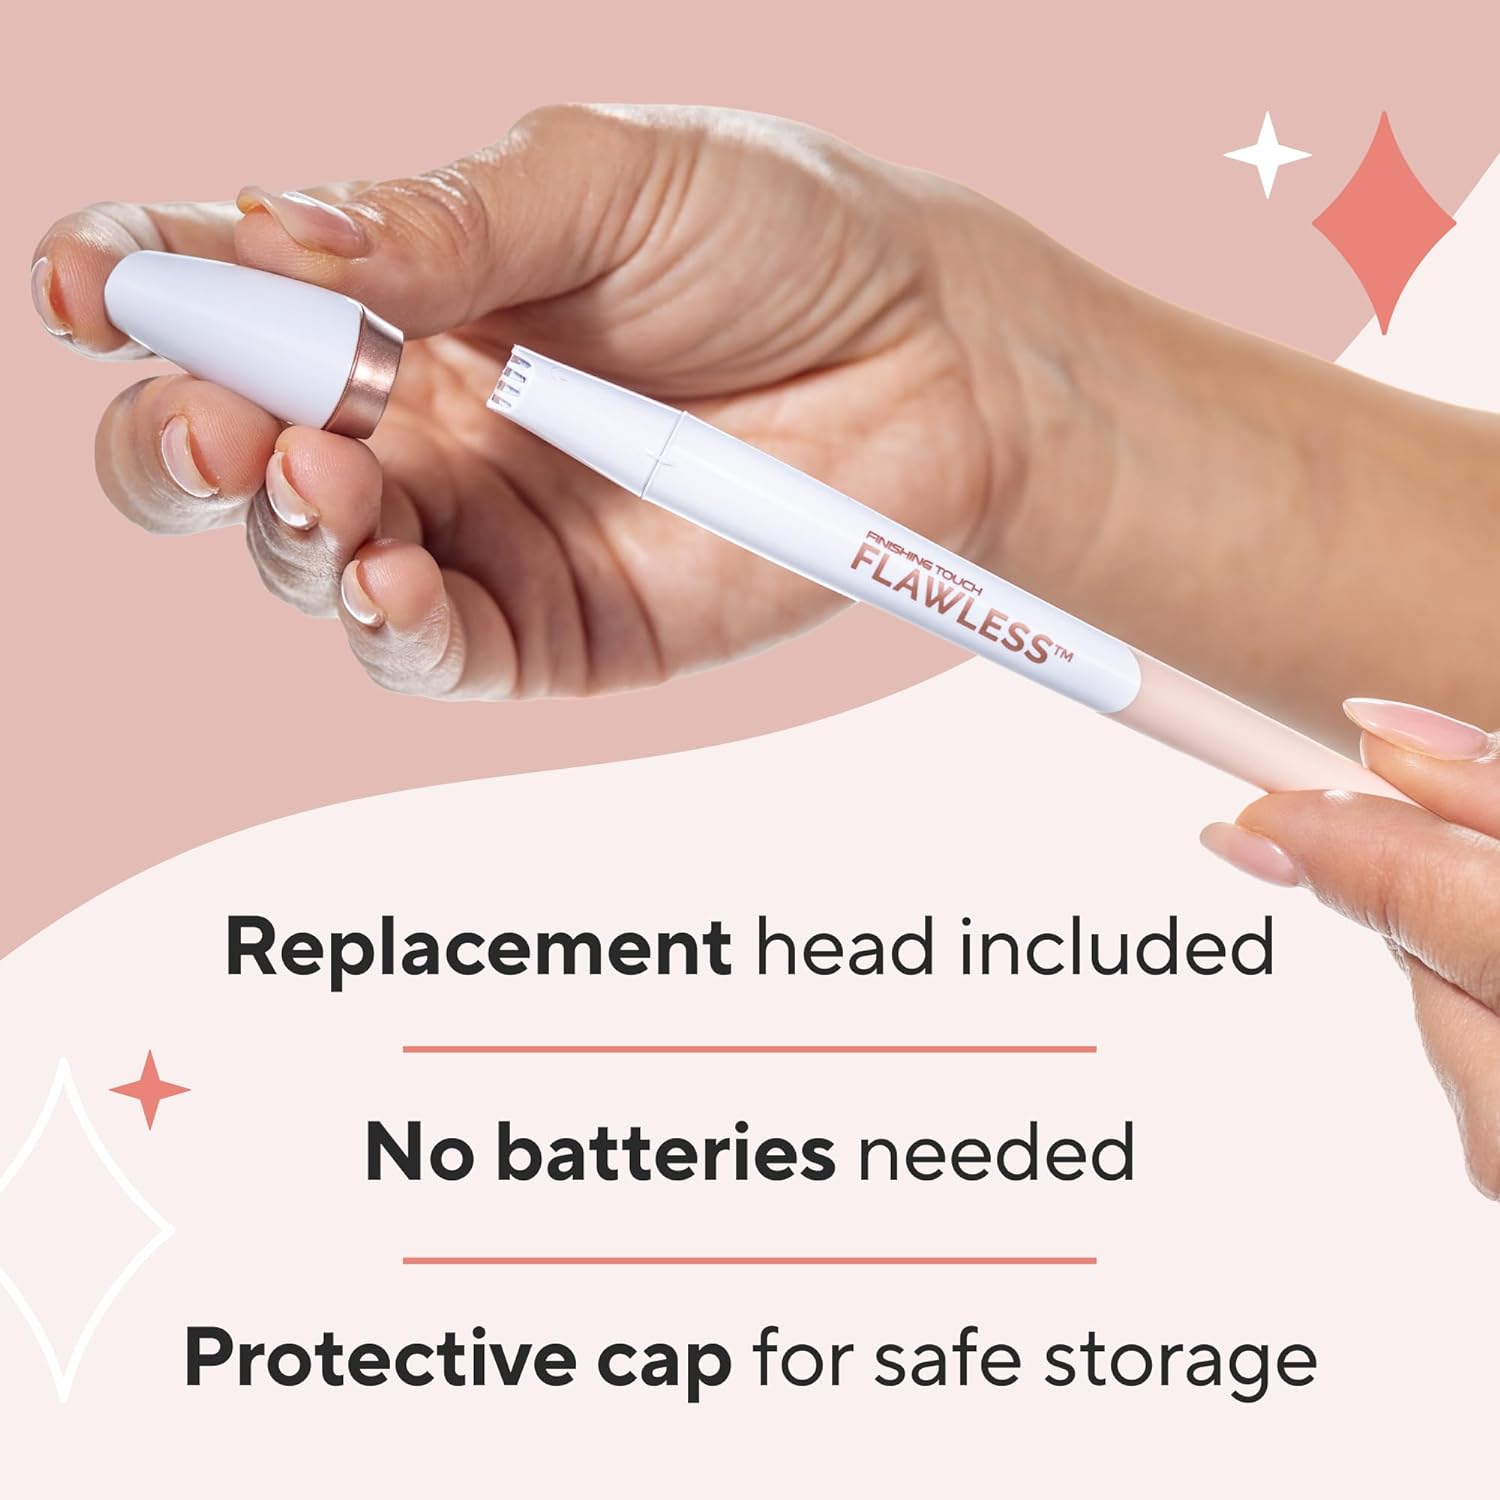 Finishing Touch Flawless Stray Hair Remover, Precise Micro-Blade Hair Removal Tool, Designed to Painlessly Cut Stray Hairs from Chin and Lips to Fingers and Toes, for All Skin Types : Beauty & Personal Care